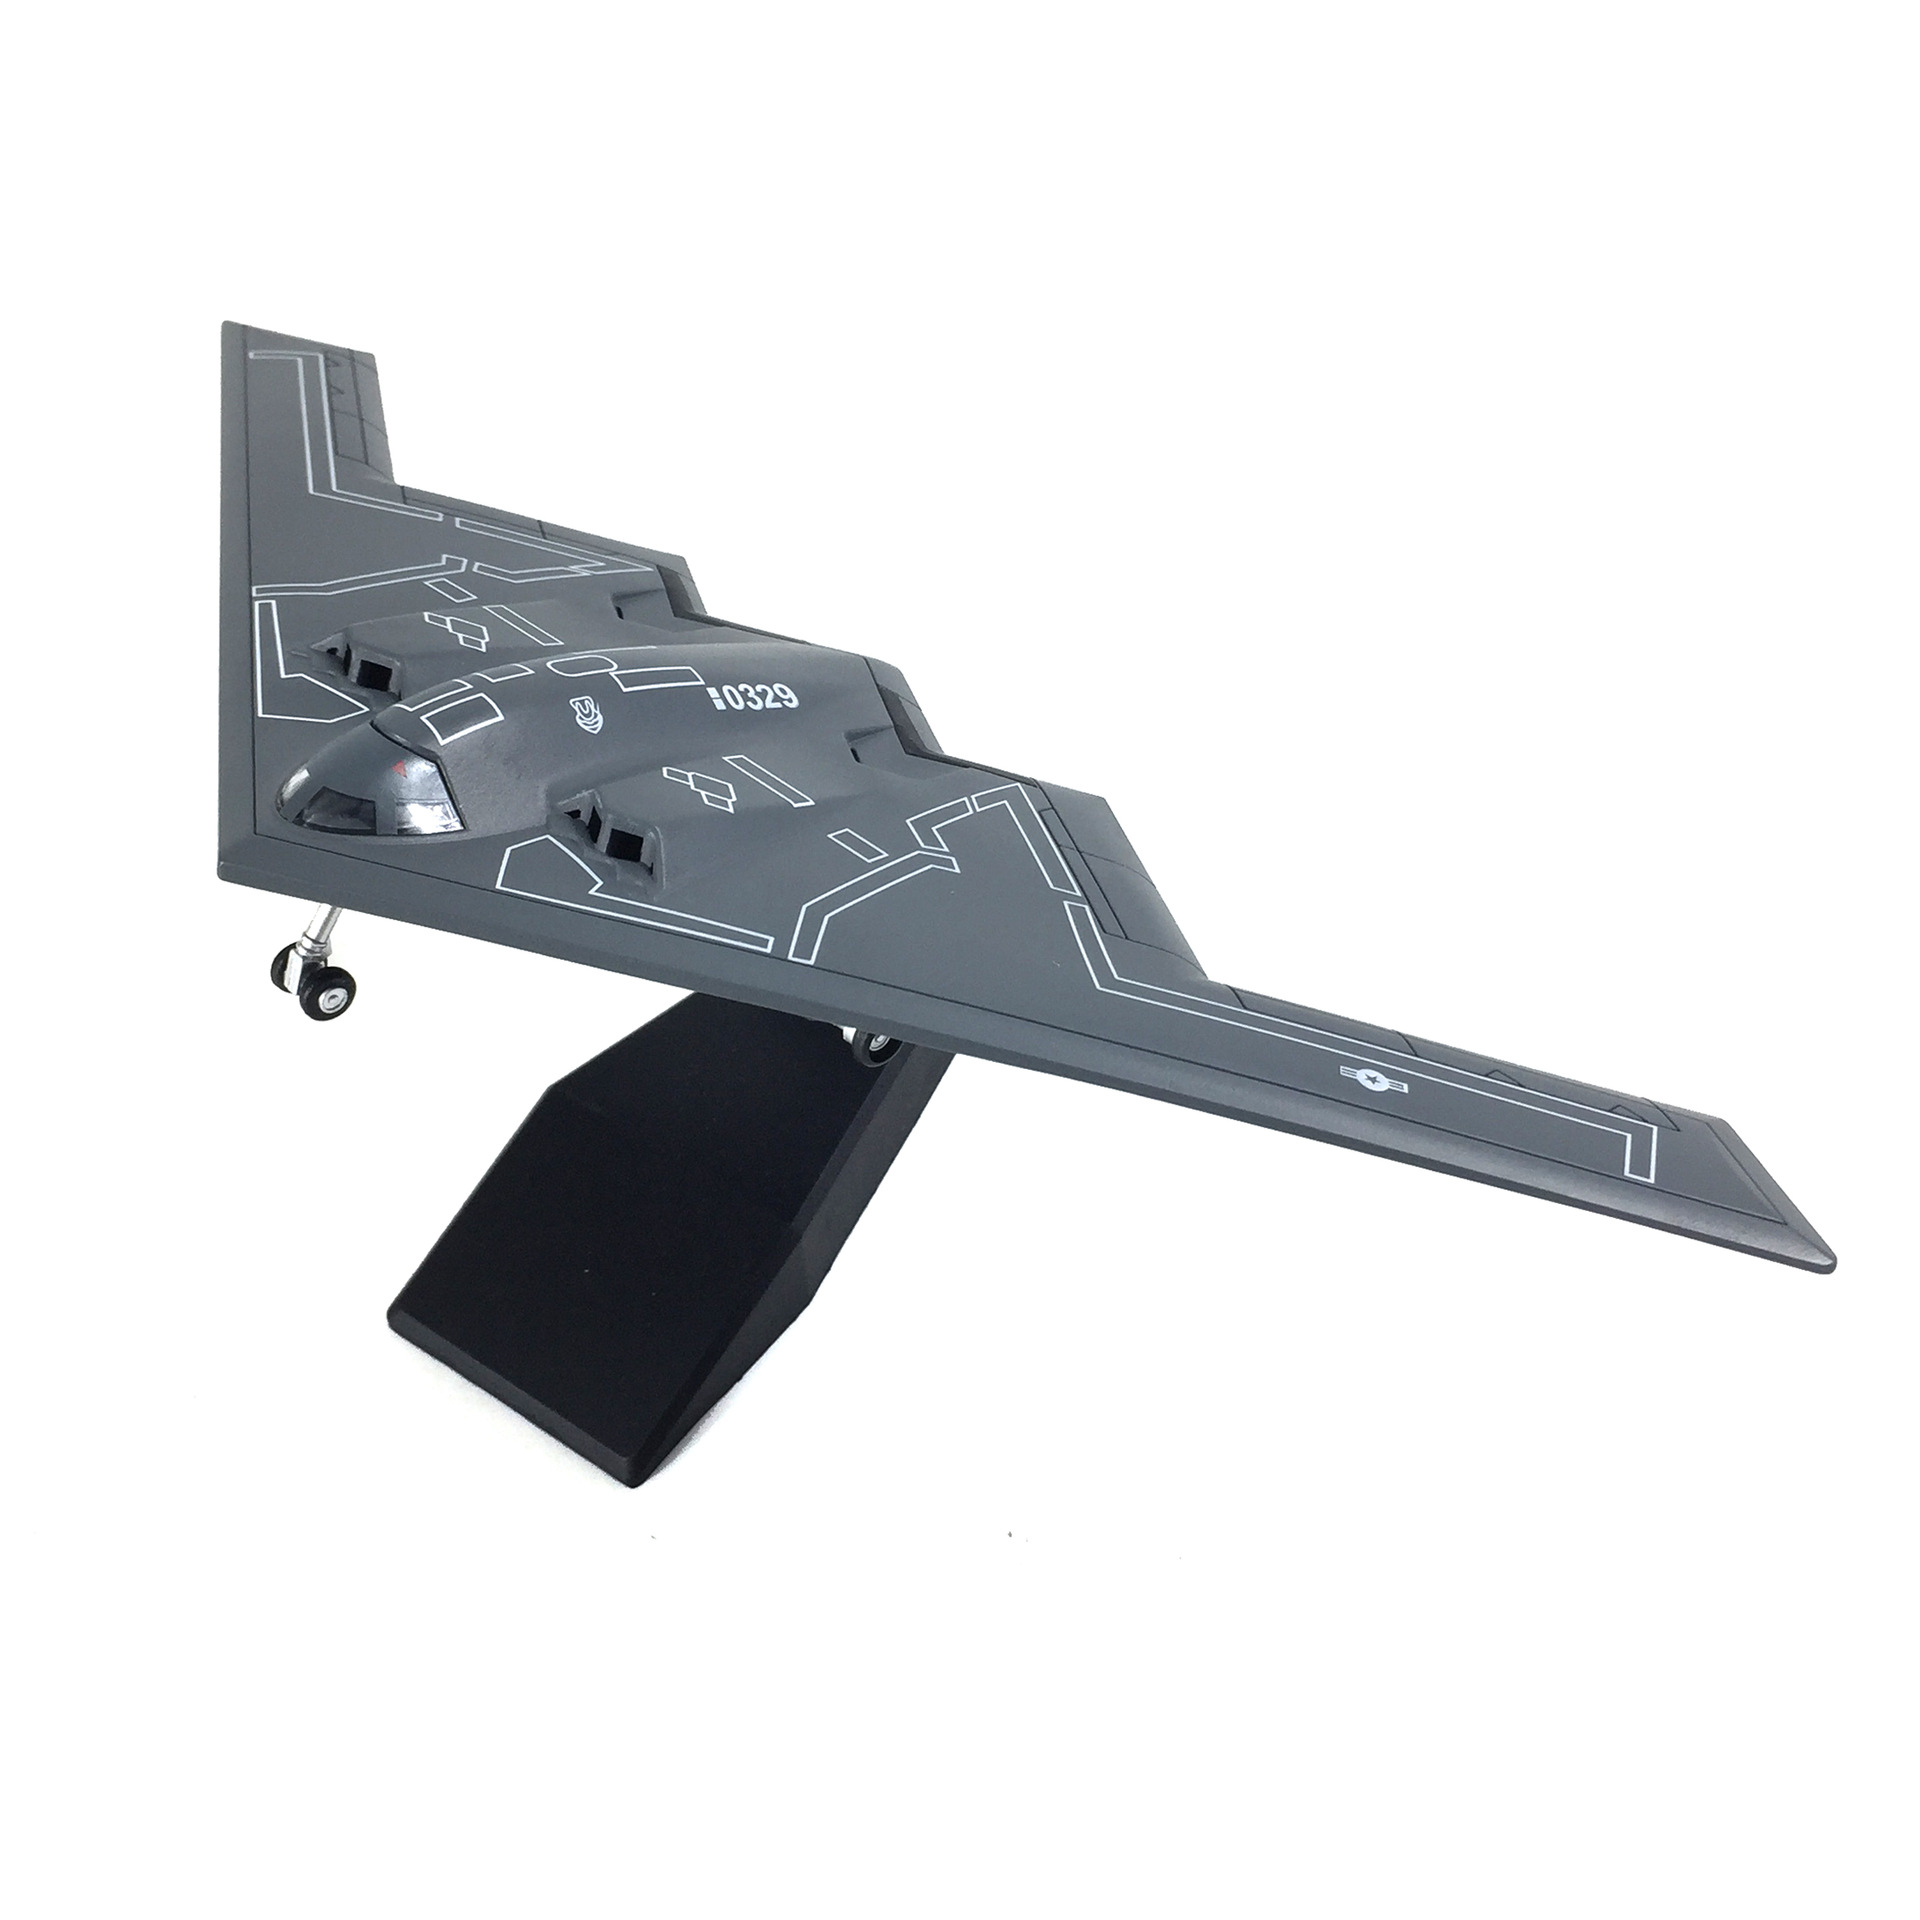 B-2 Stealth Strategic Bomber 1/200 Scale Diecast Metal Model Fighter  Fighter Suitable For Collection Or Gift